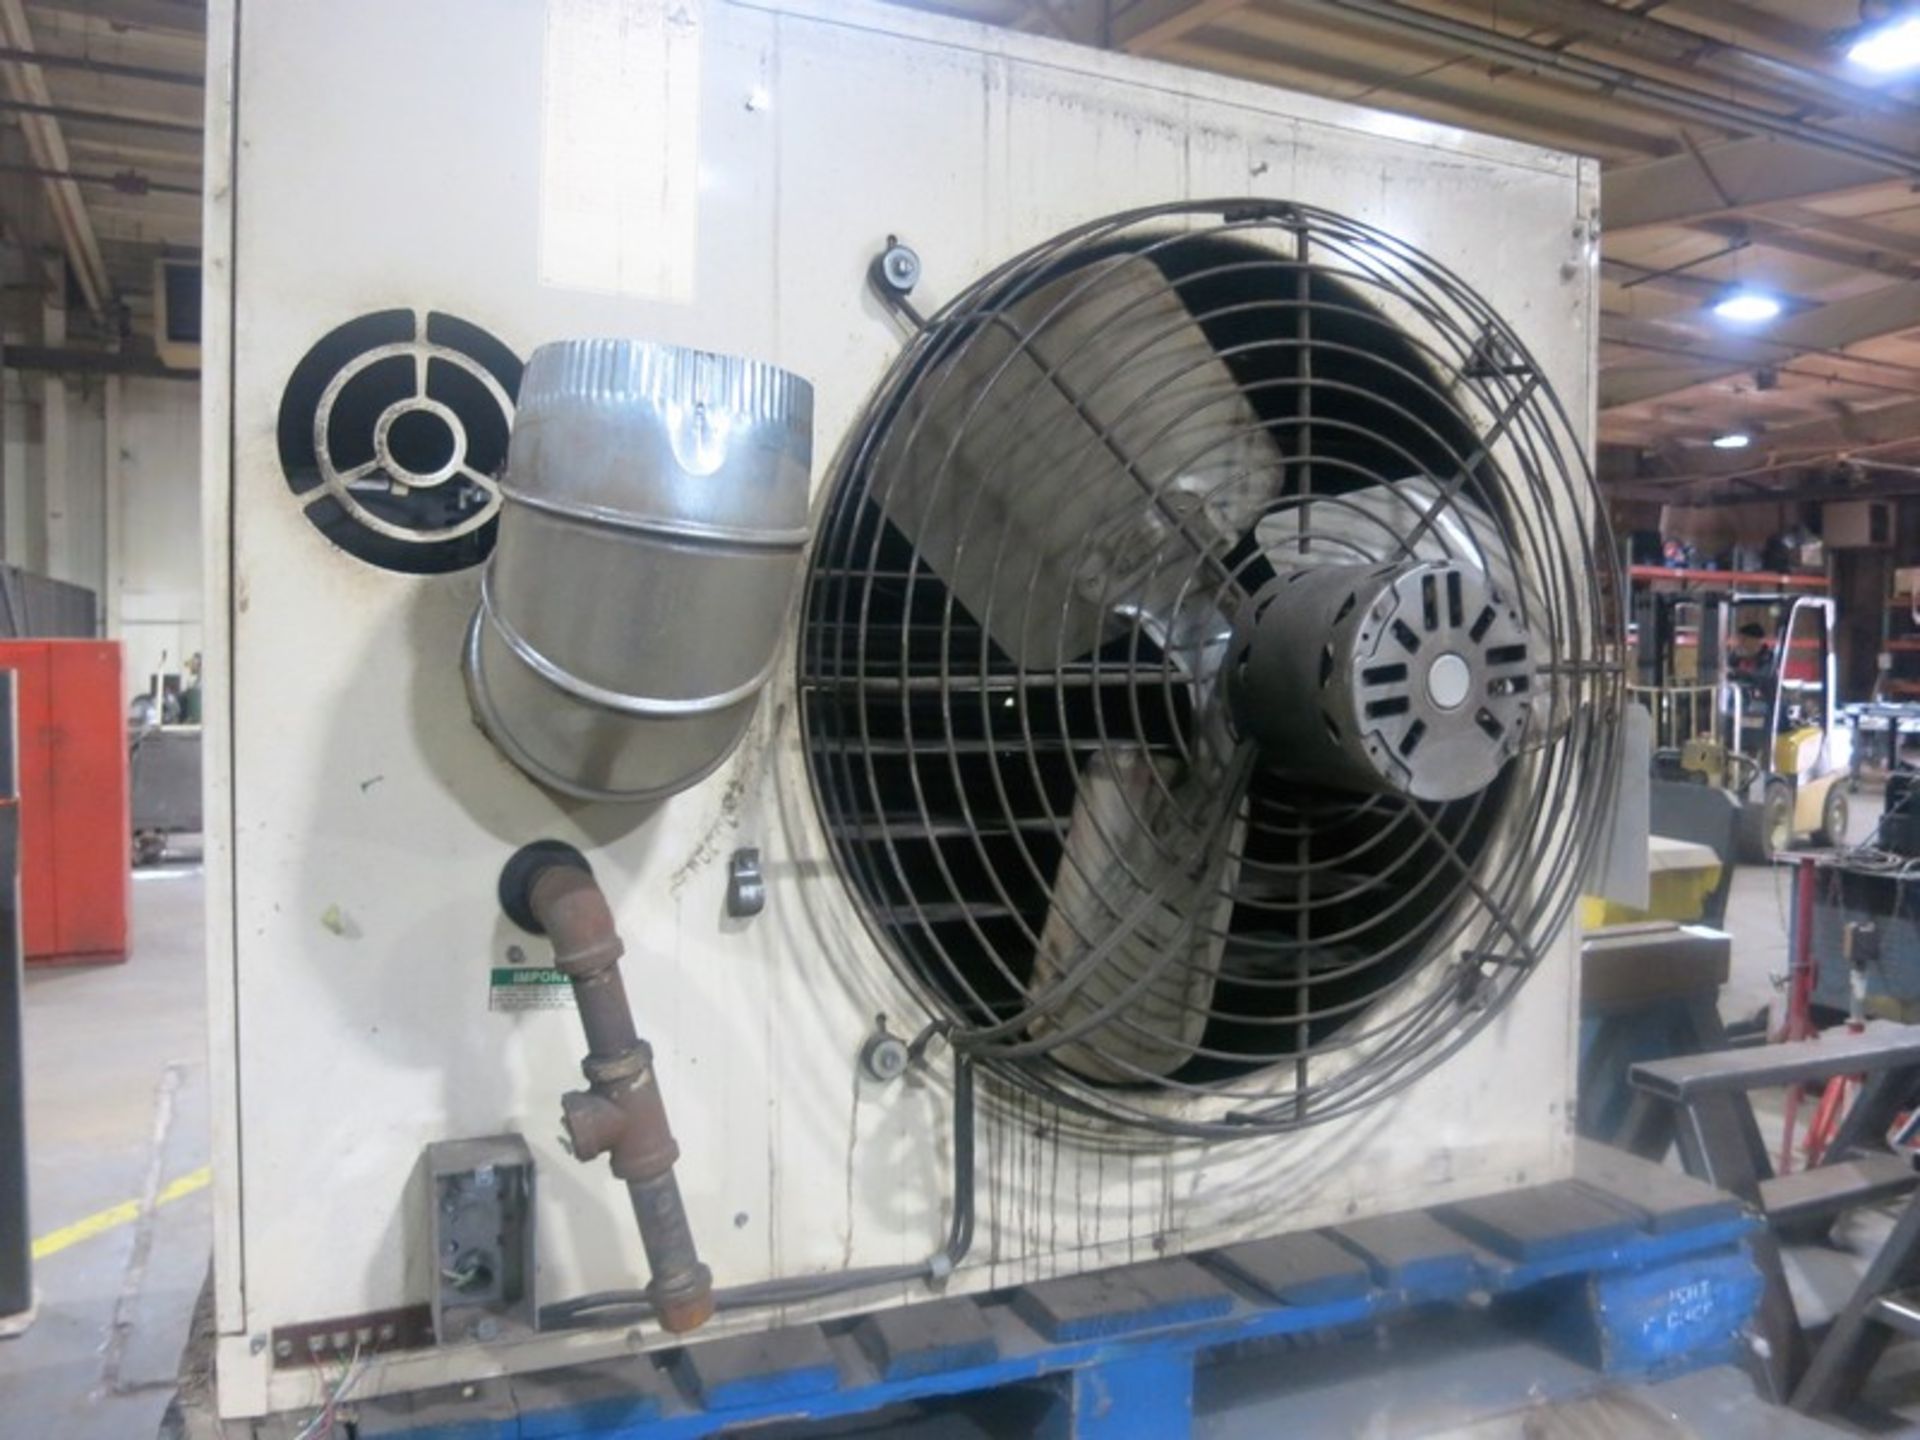 REZNOR MODEL UDAP 300 GAS FORCED AIR FURNANCE - Image 2 of 3